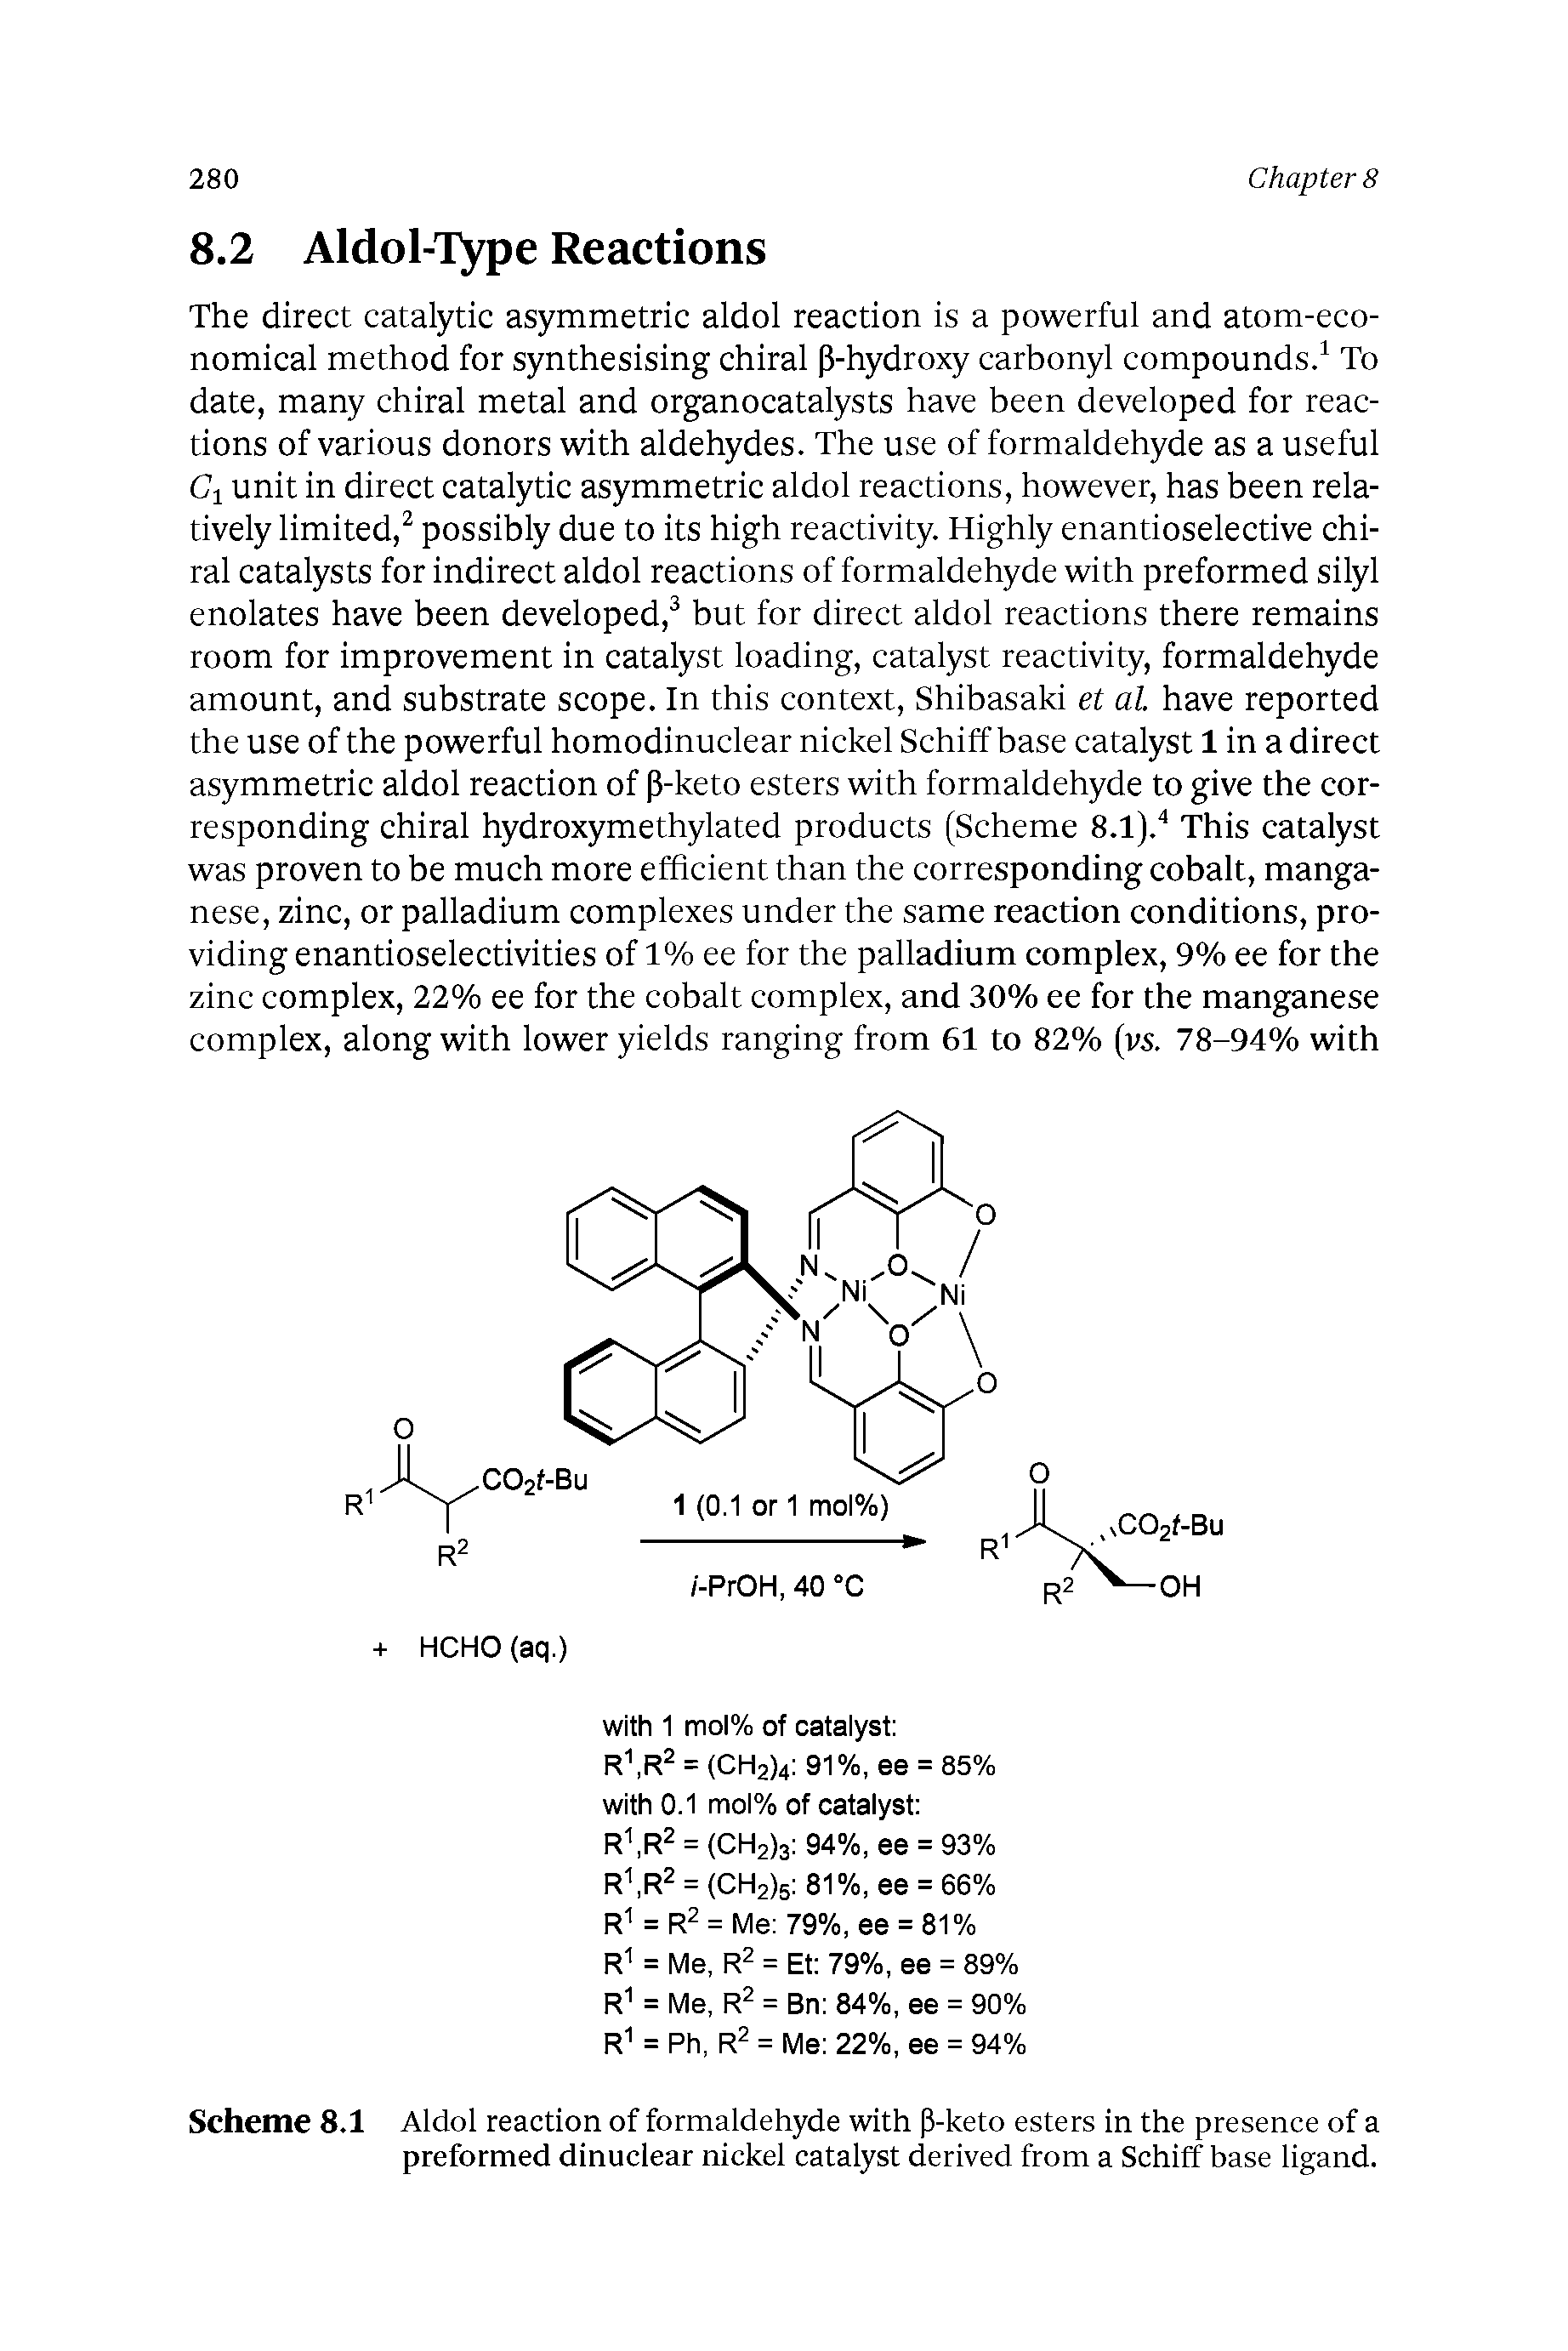 Scheme 8.1 Aldol reaction of formaldehyde with P-keto esters in the presence of a preformed dinuclear nickel catalyst derived from a Schiff base ligand.